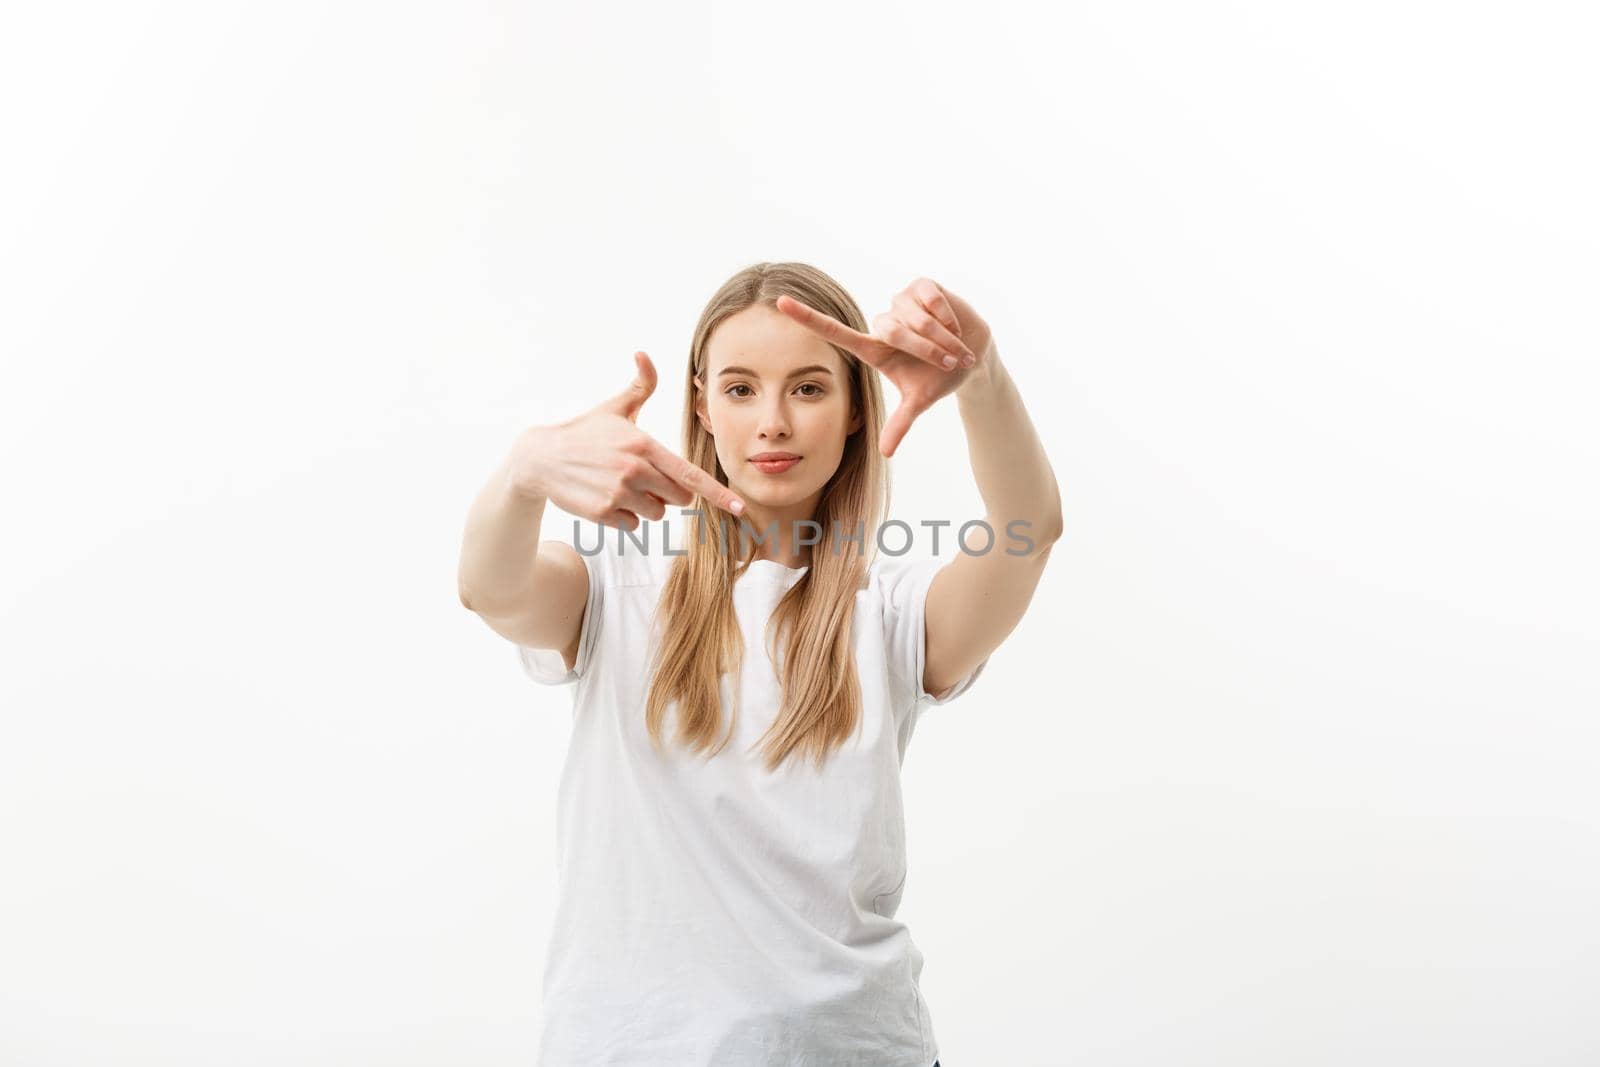 Portrait of young beautiful caucasian woman with cheerfuly smiling making a camera frame with fingers. Isolated on white background. Copy space